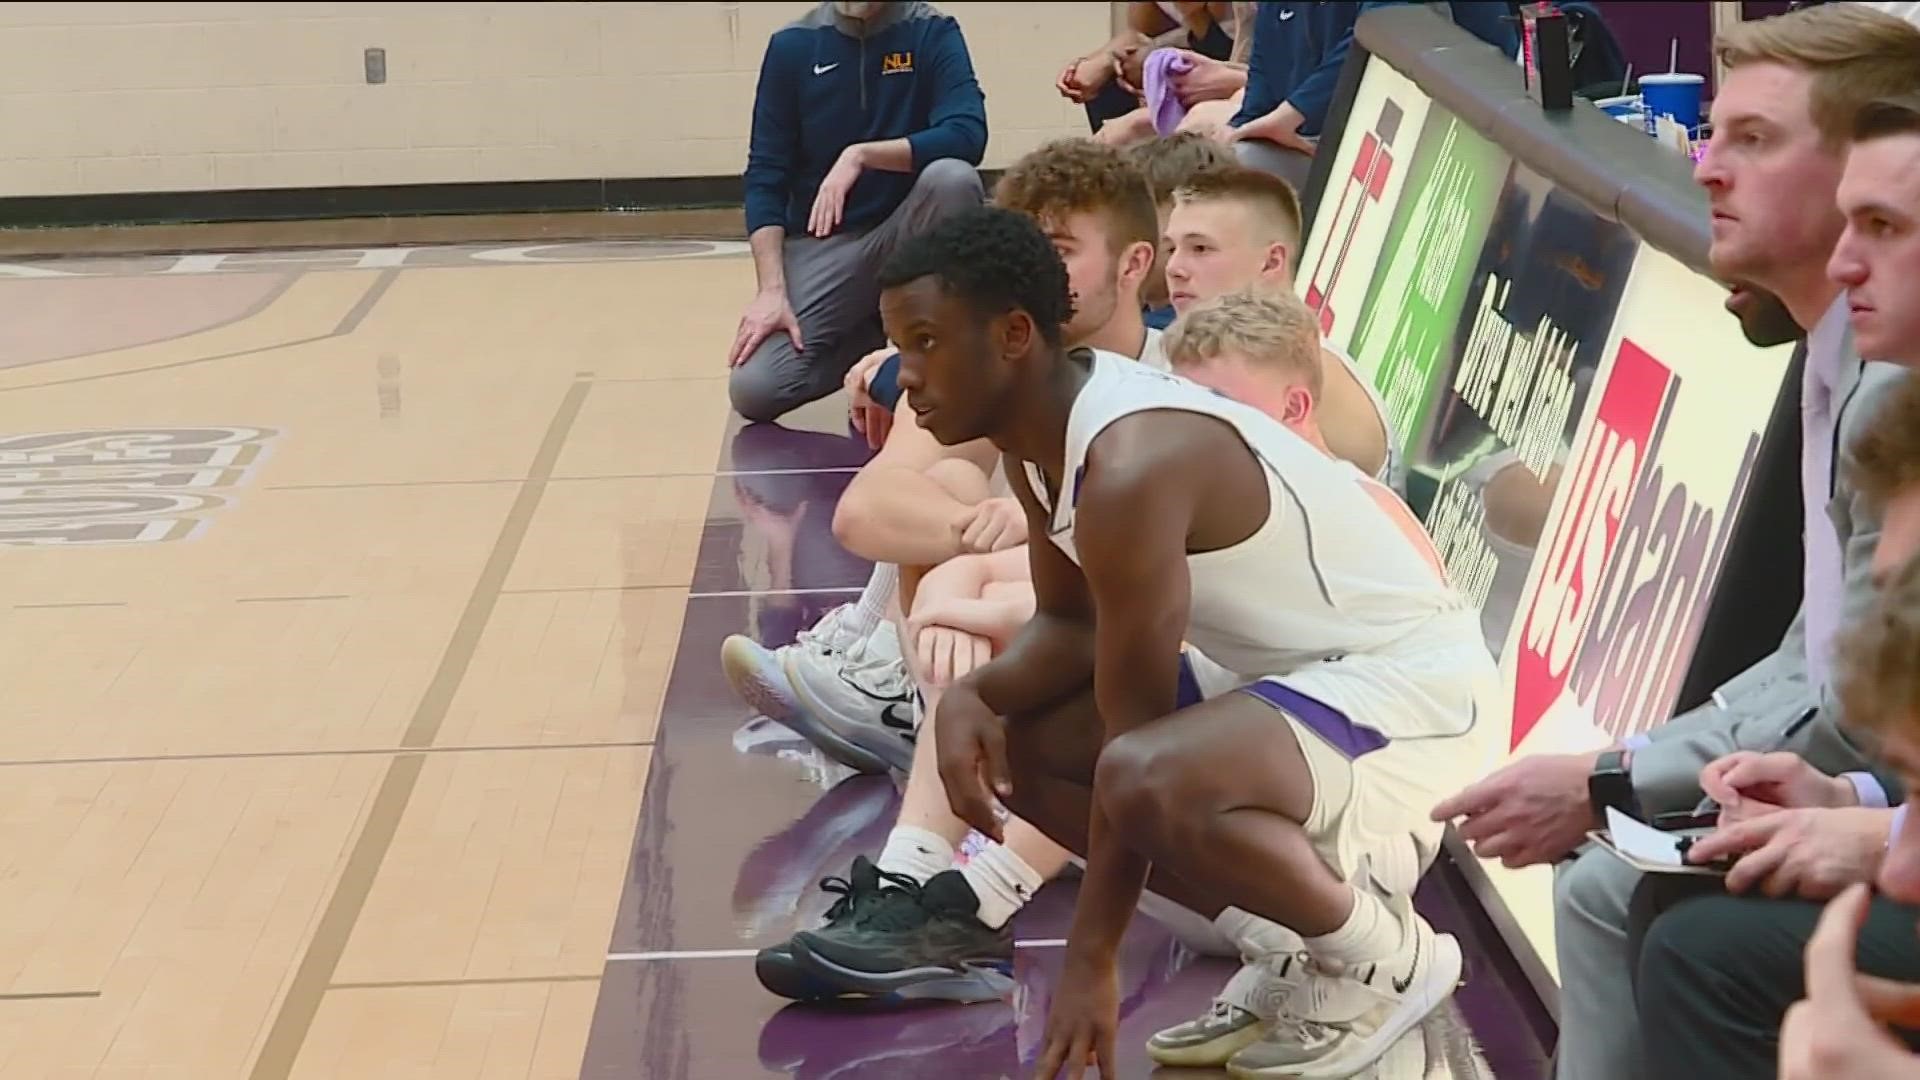 The top-ranked College of Idaho men's basketball team brings its leading scorer, rebounder and assist-getter off the bench. The Yotes are 20-1 and 15-0 in CCC play.